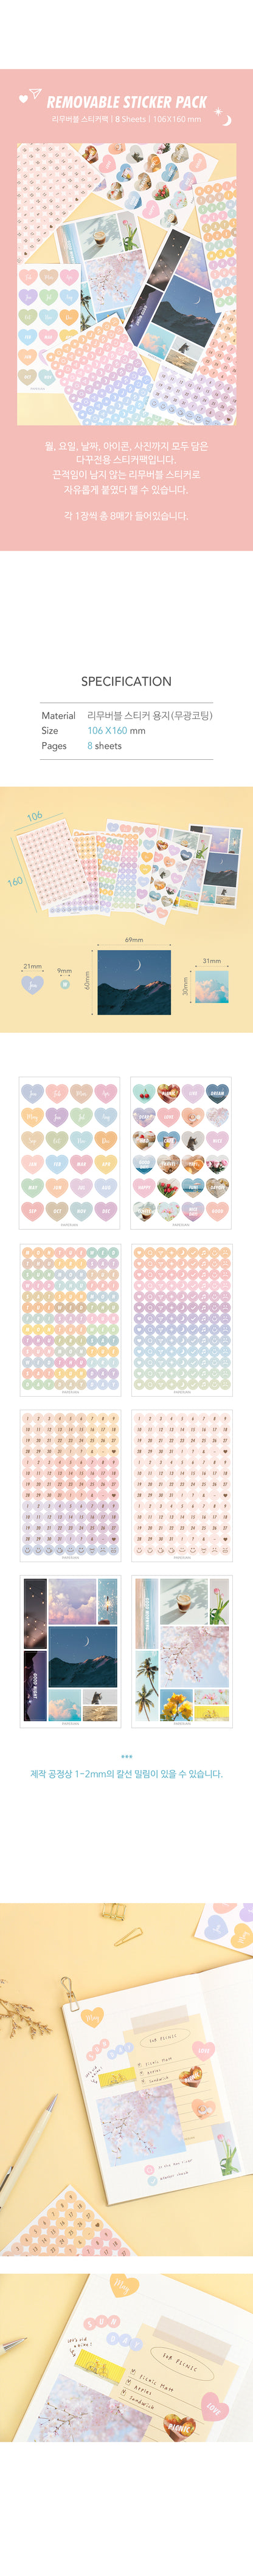 Removable Planner Sticker Pack 8 Sheets Paperian 2 Decorative Stickers, Planner Stickers Hunter & The Scholar